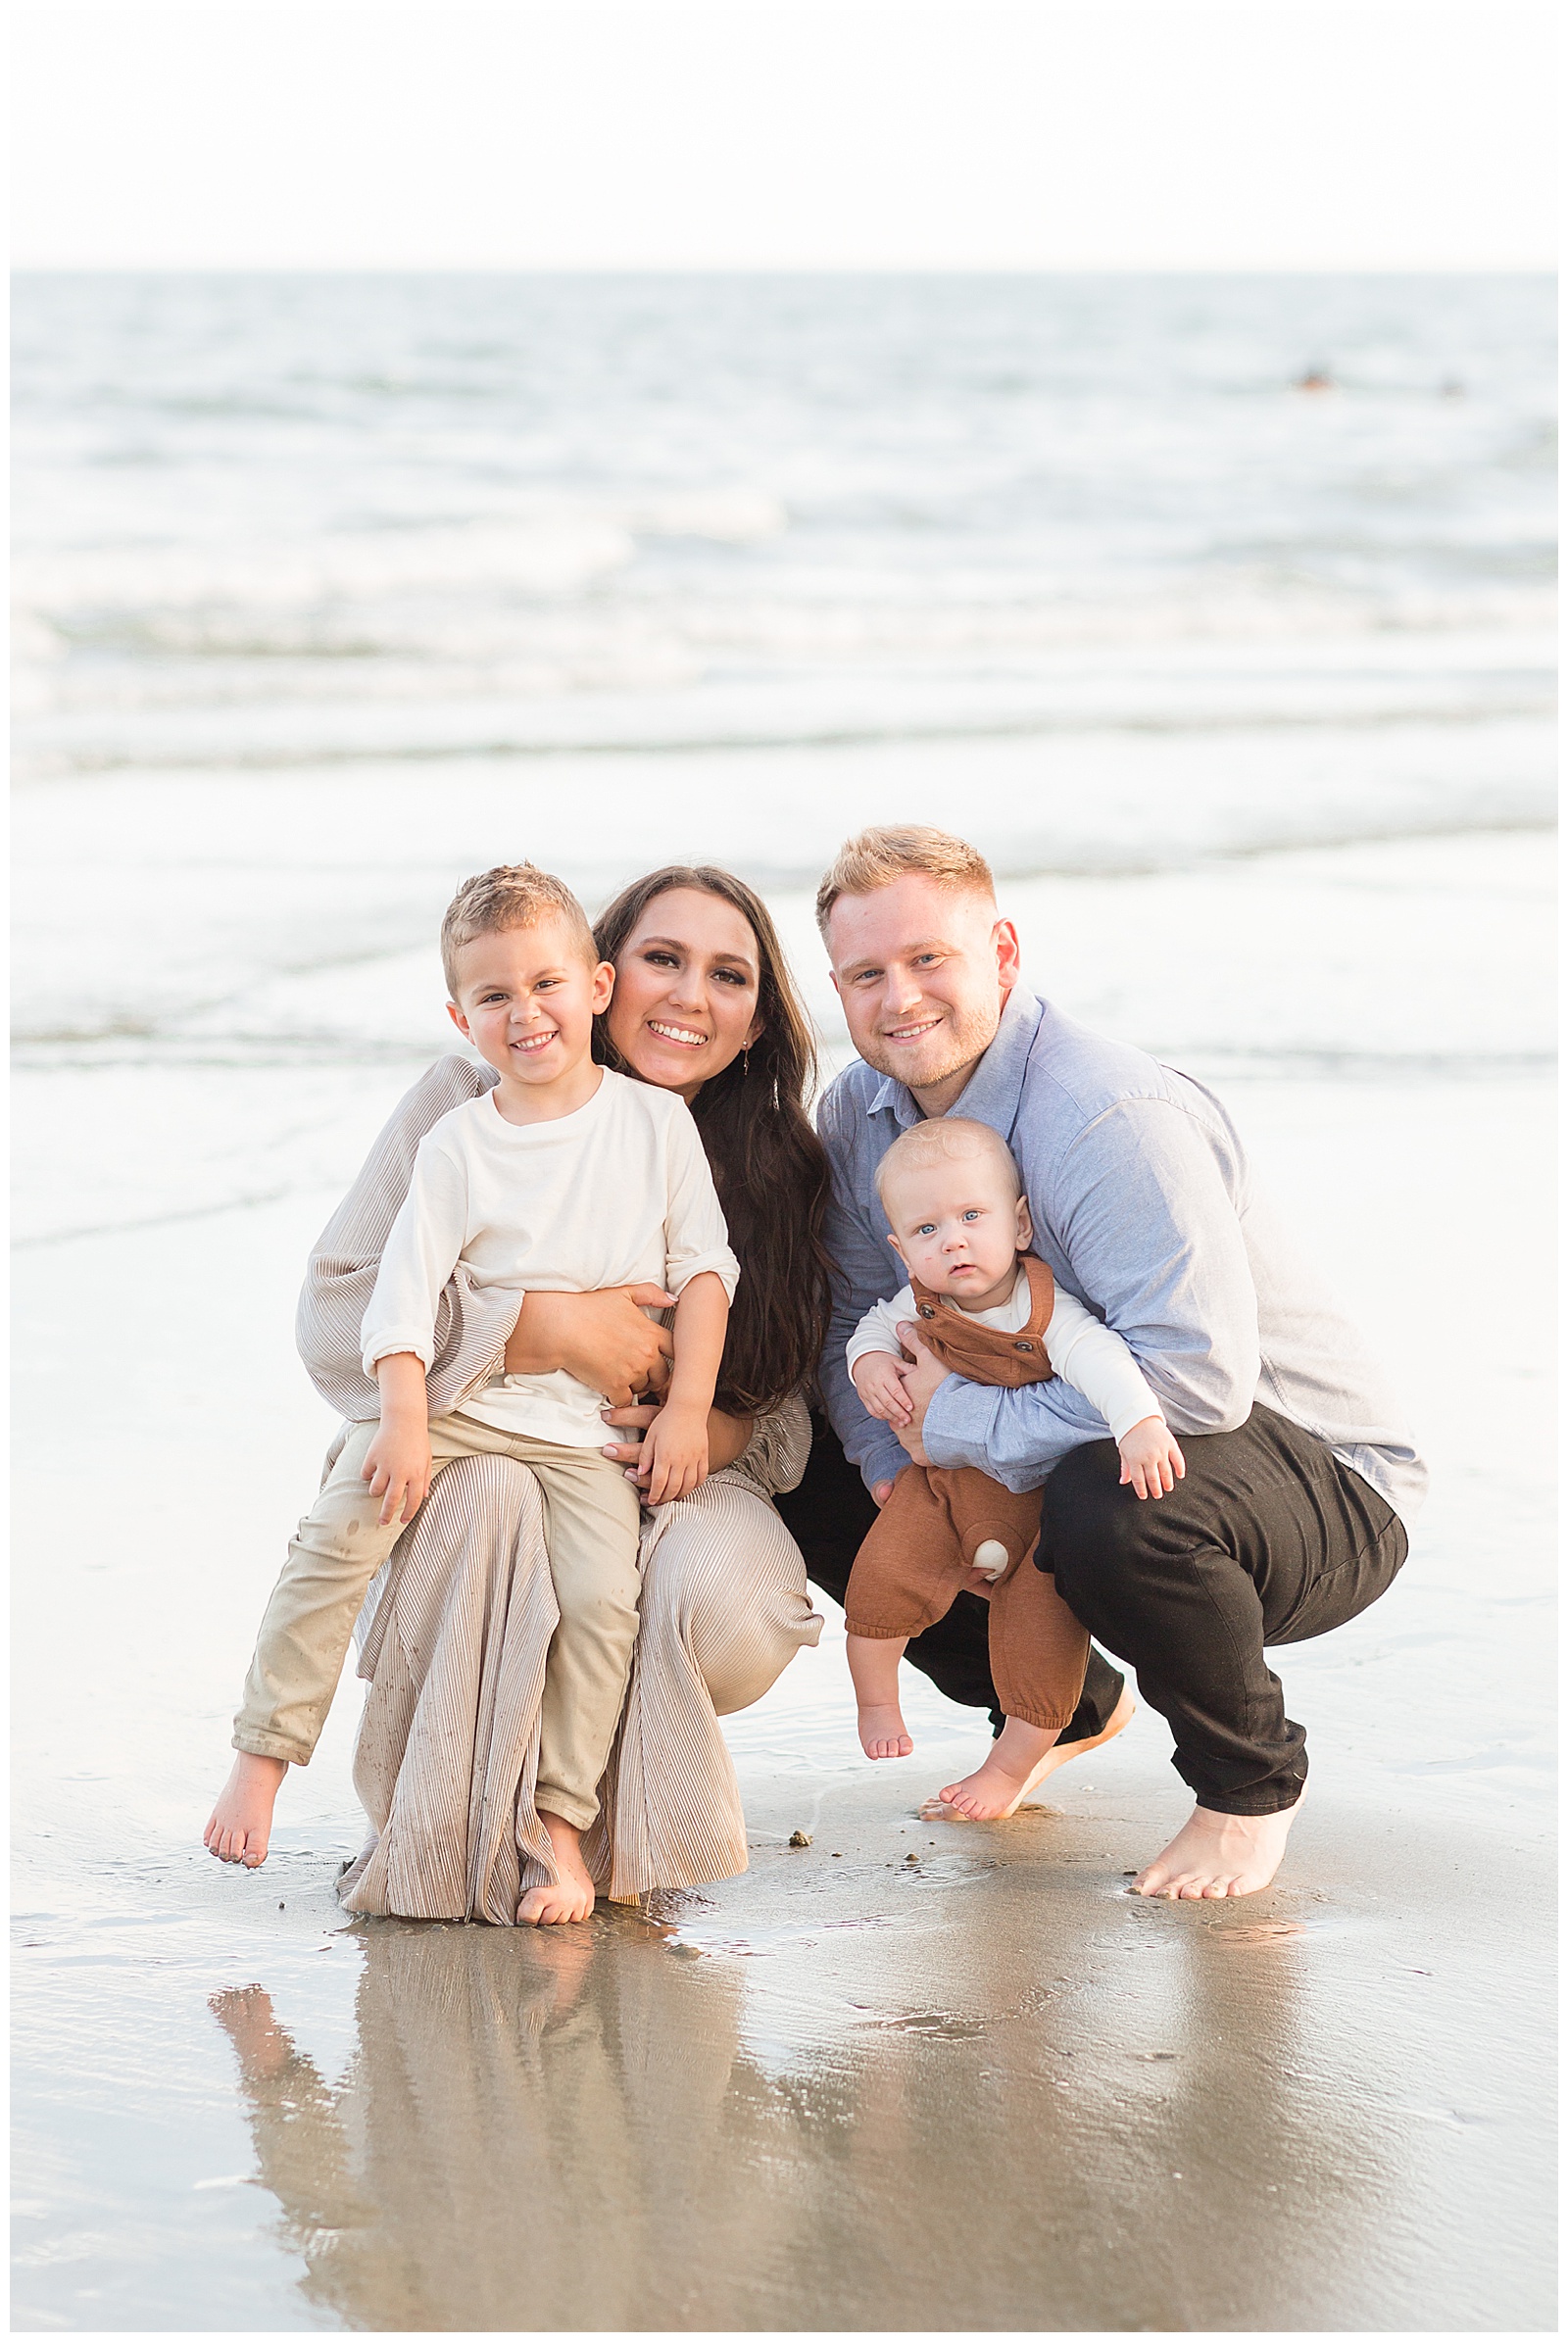 Charleston family photographer, Rebecca Rice, captures family of four on the Isle of Palms beach for her Behind the Lens membership.